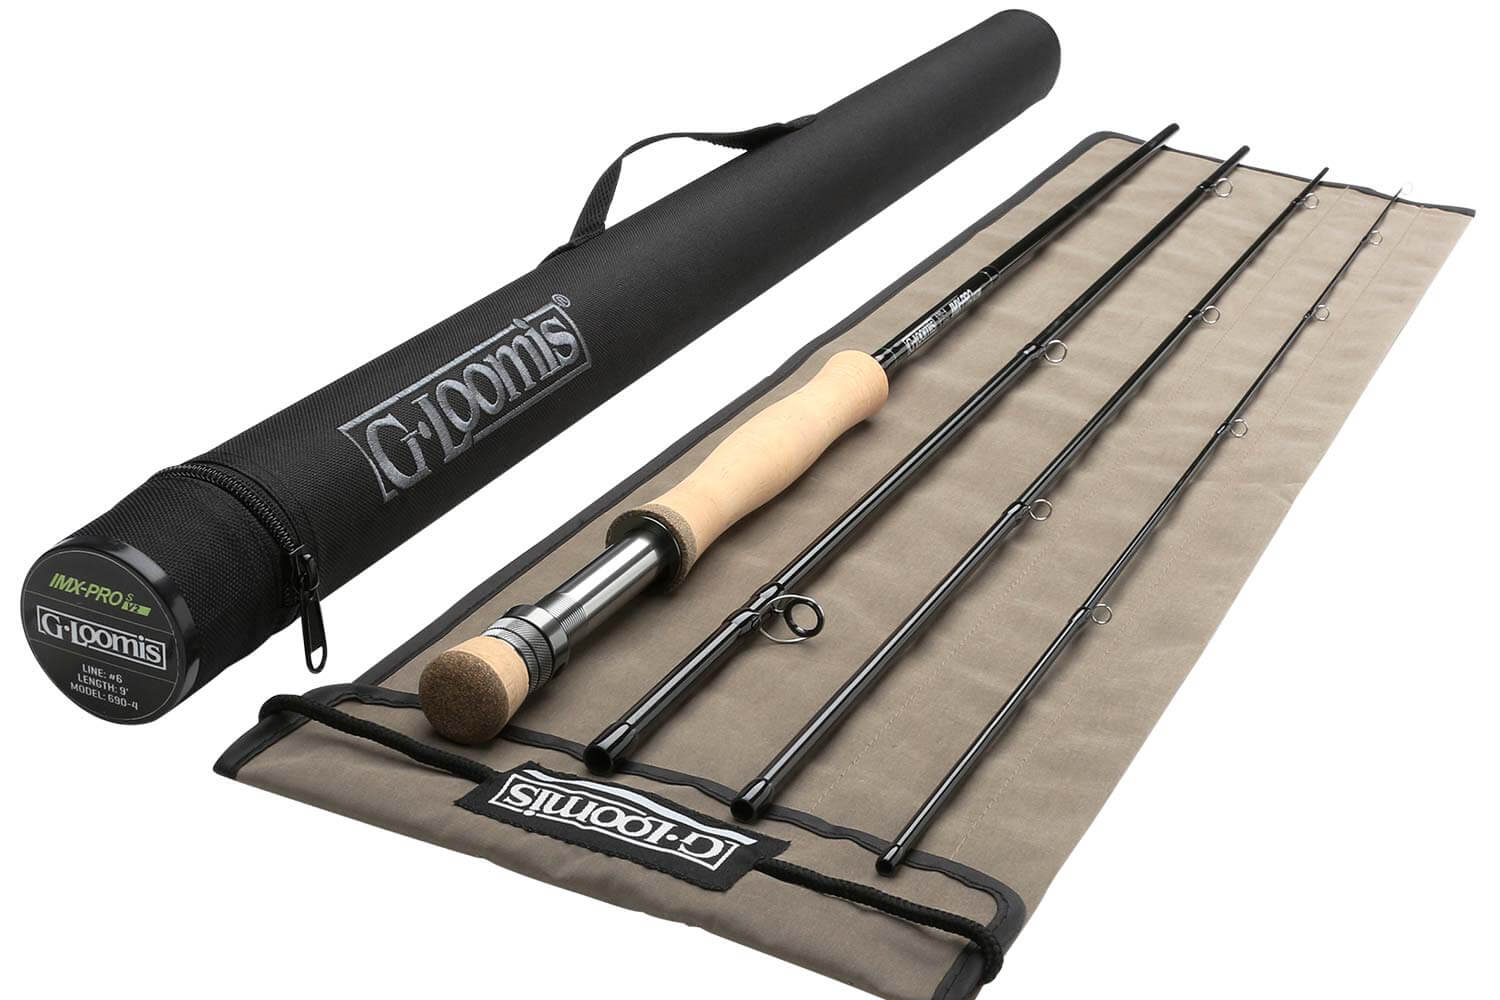 New Orvis Recon and GLoomis NRX+ Rods: River Time! 